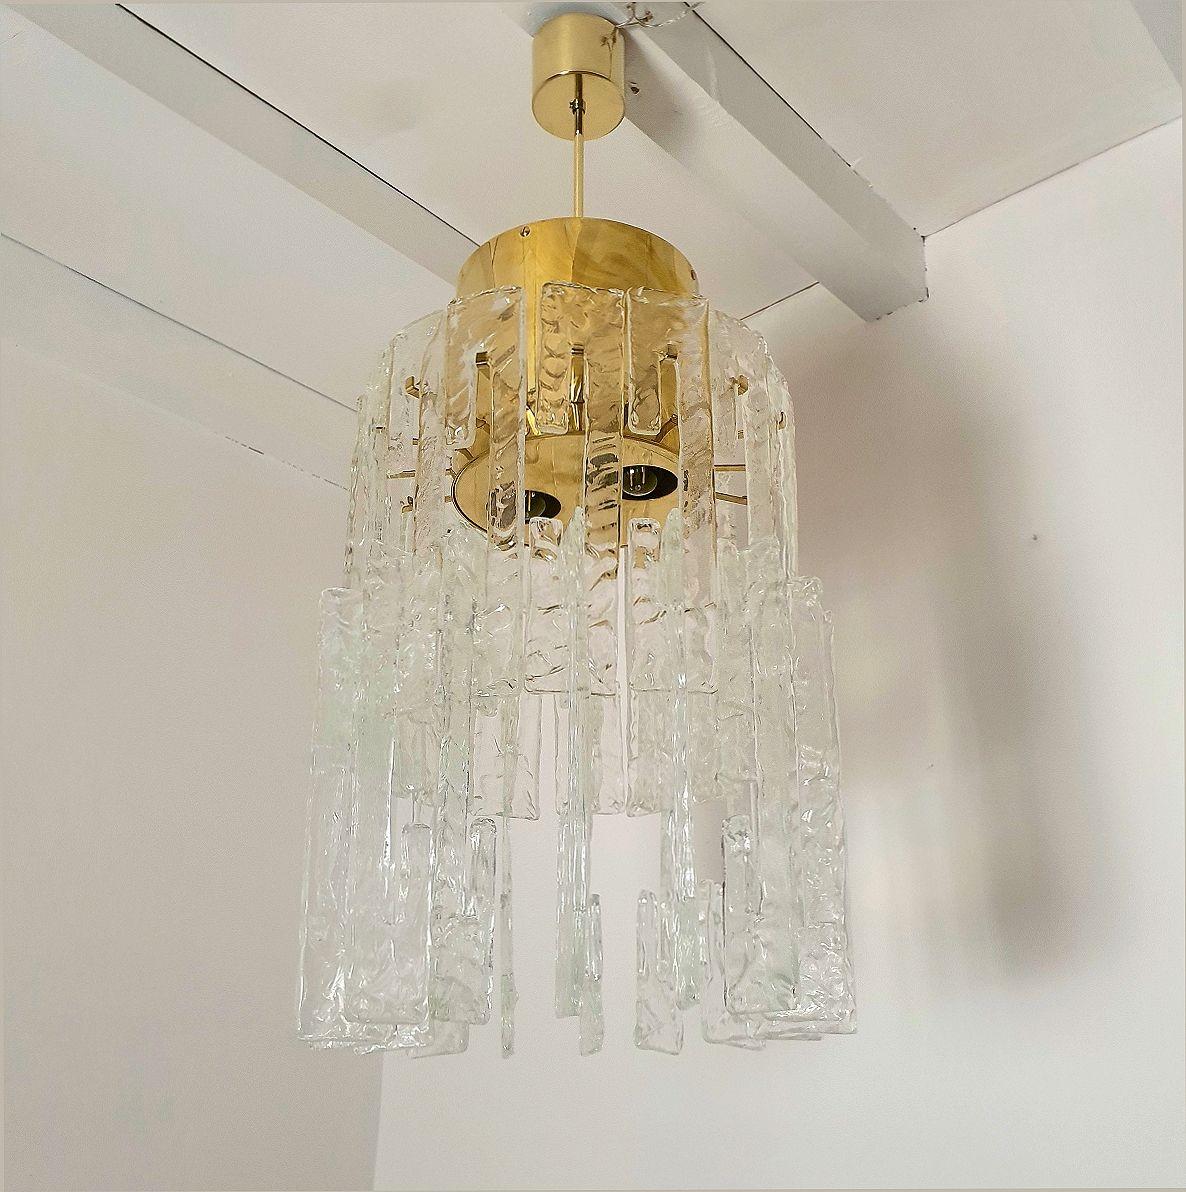 Mid-Century Modern brass and clear Murano glass pendant chandelier, by Mazzega, Italy, 1970s
The brass frame is in polished brass. The clear interlocking Murano glass elements are textured and translucent.
They have a shape of letter C, tall and